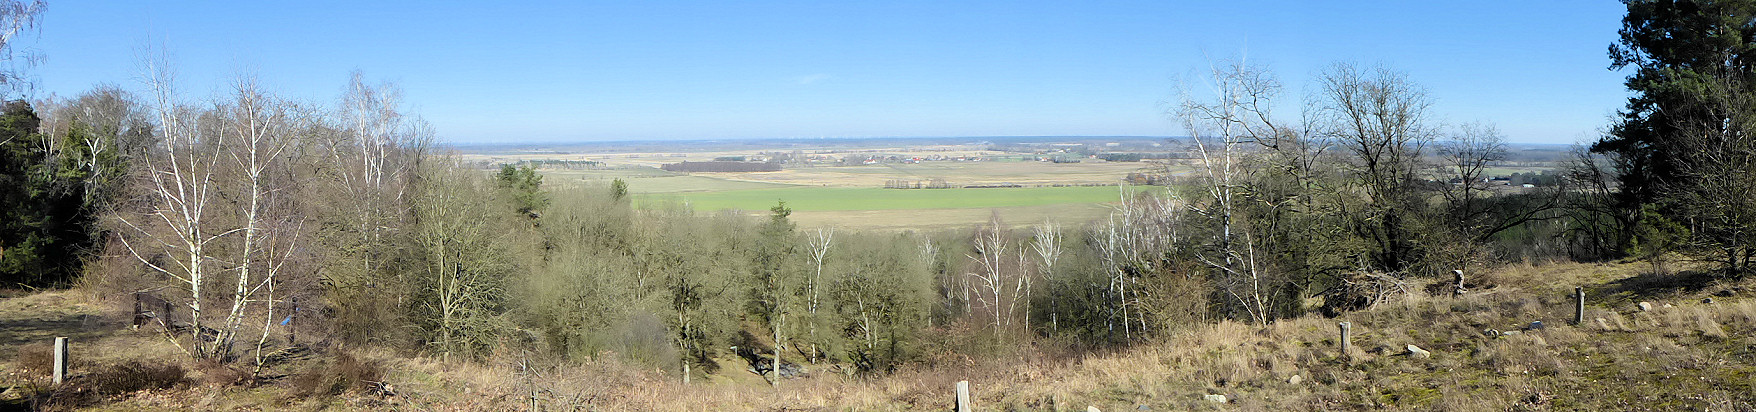 Panorama - View from the Gollenberg to the north